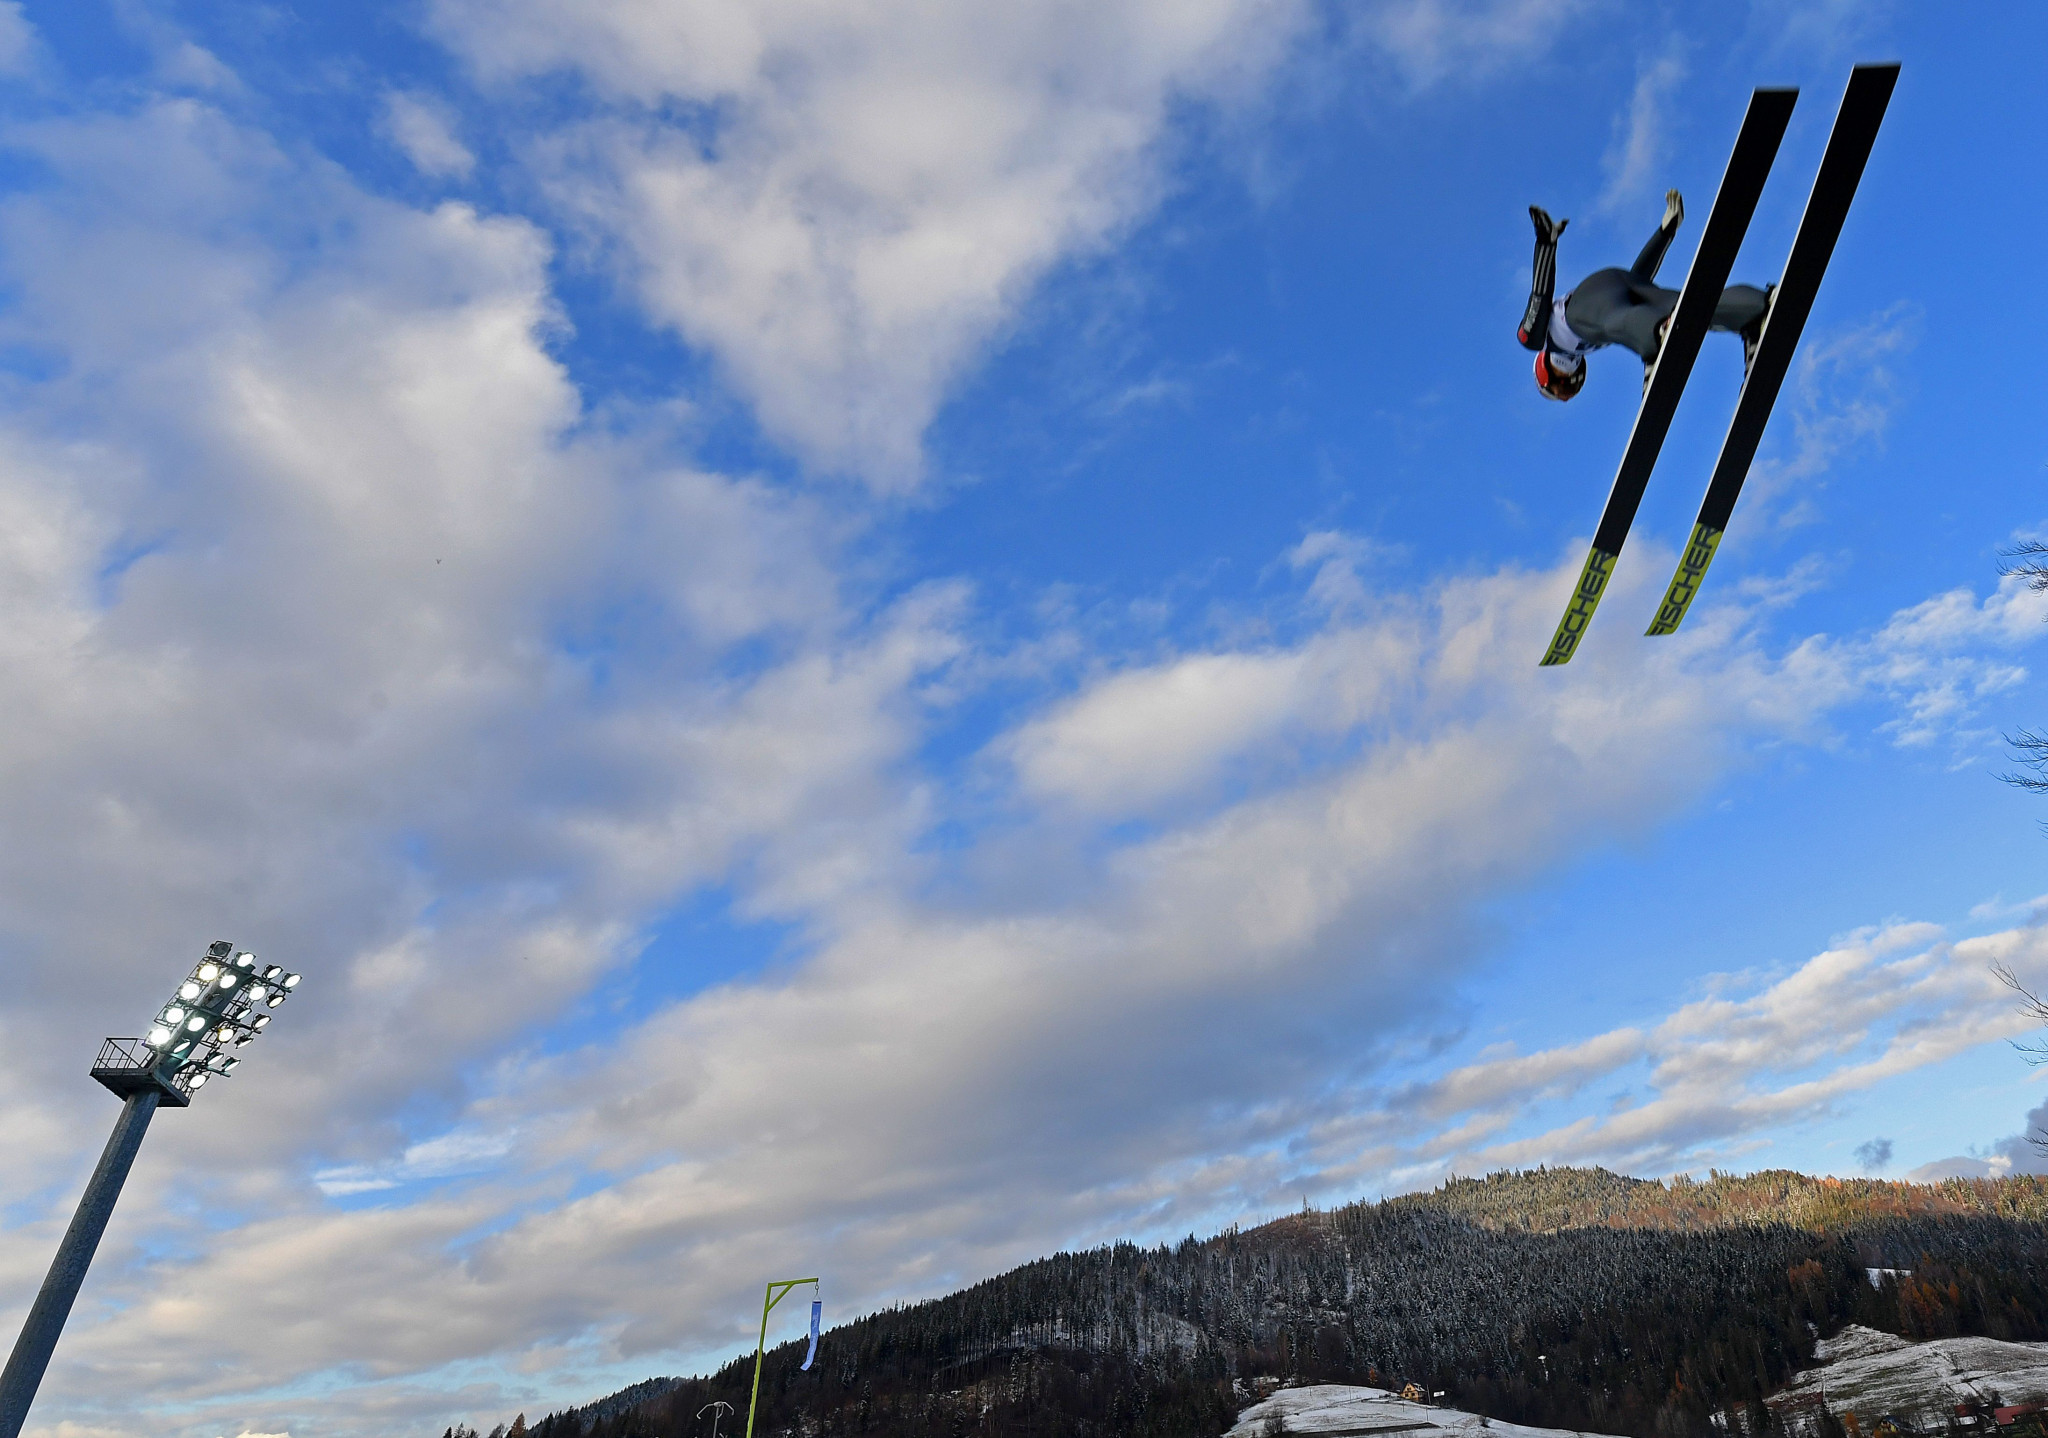 Wisła to stage first team event of Ski Jumping World Cup season